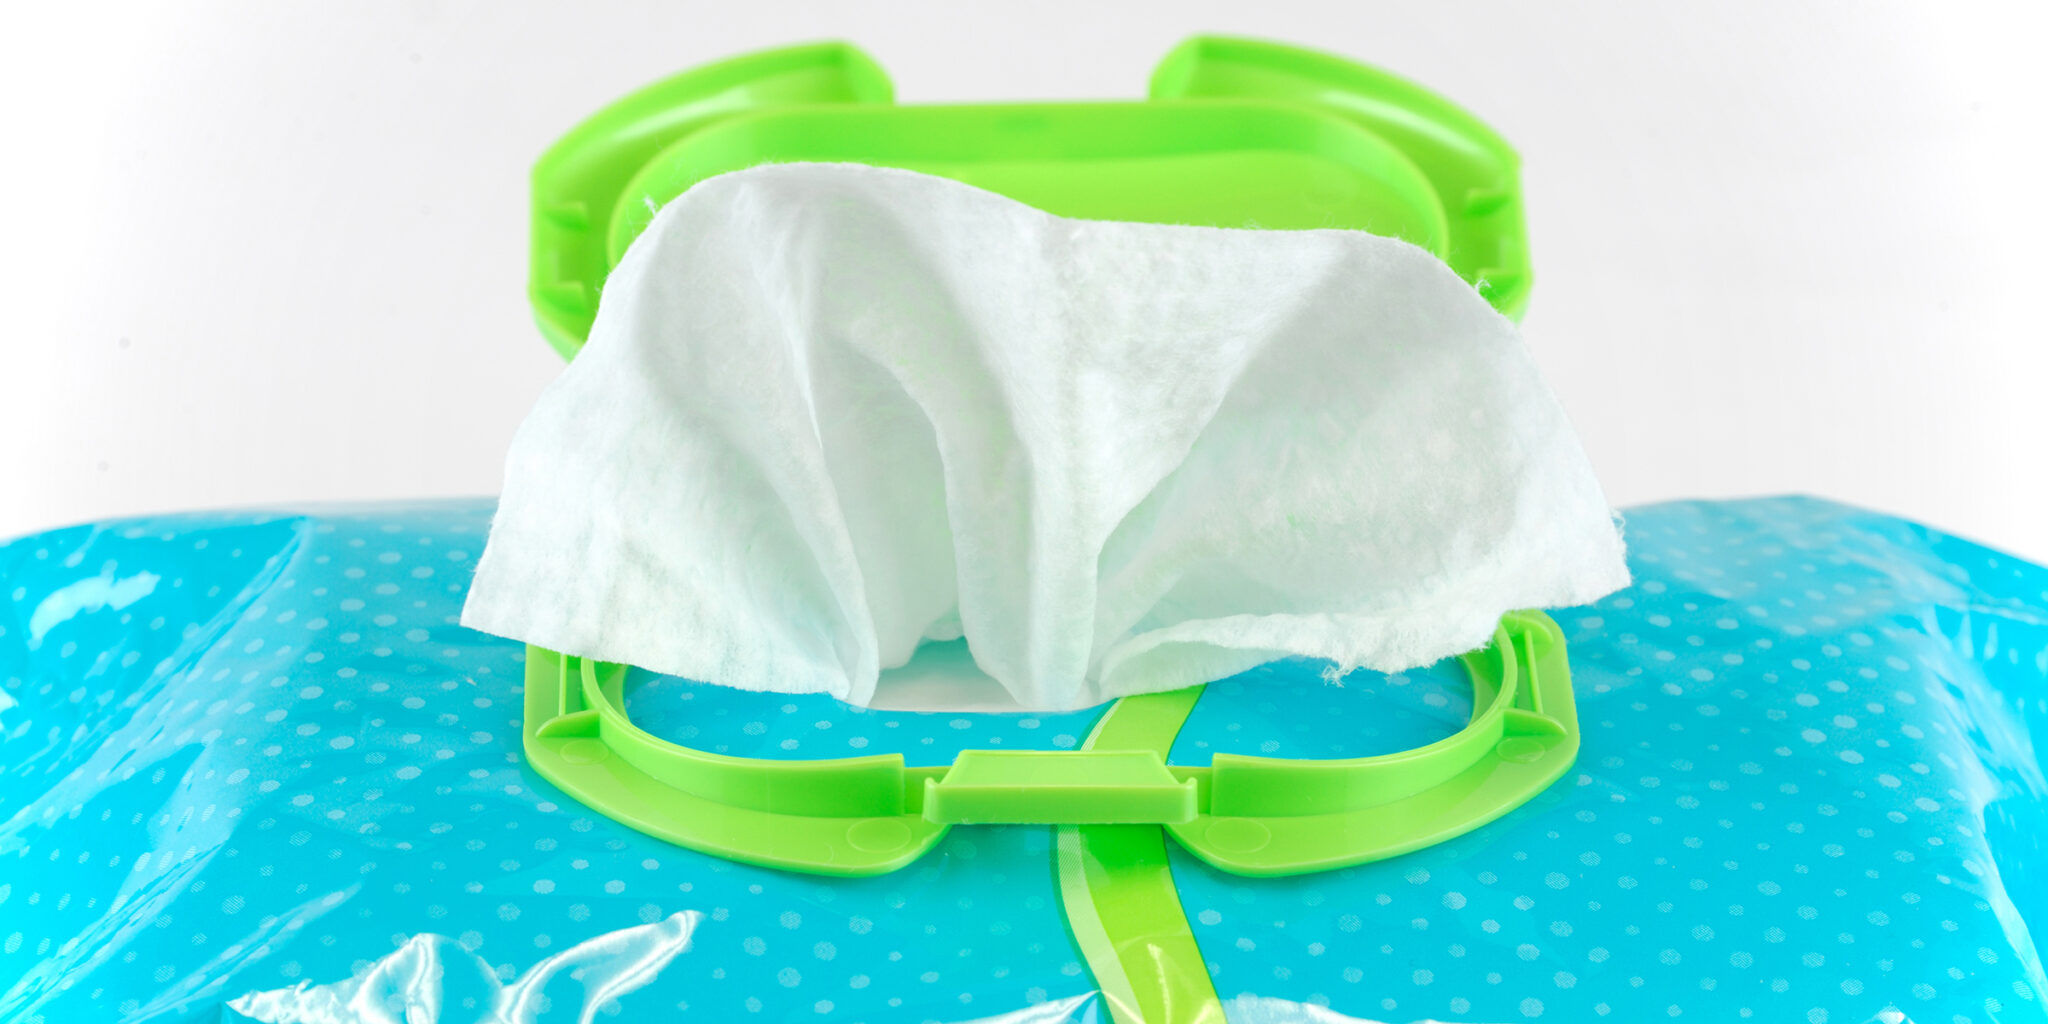 Are Wet Wipes Flushable? | All Day Plumbing